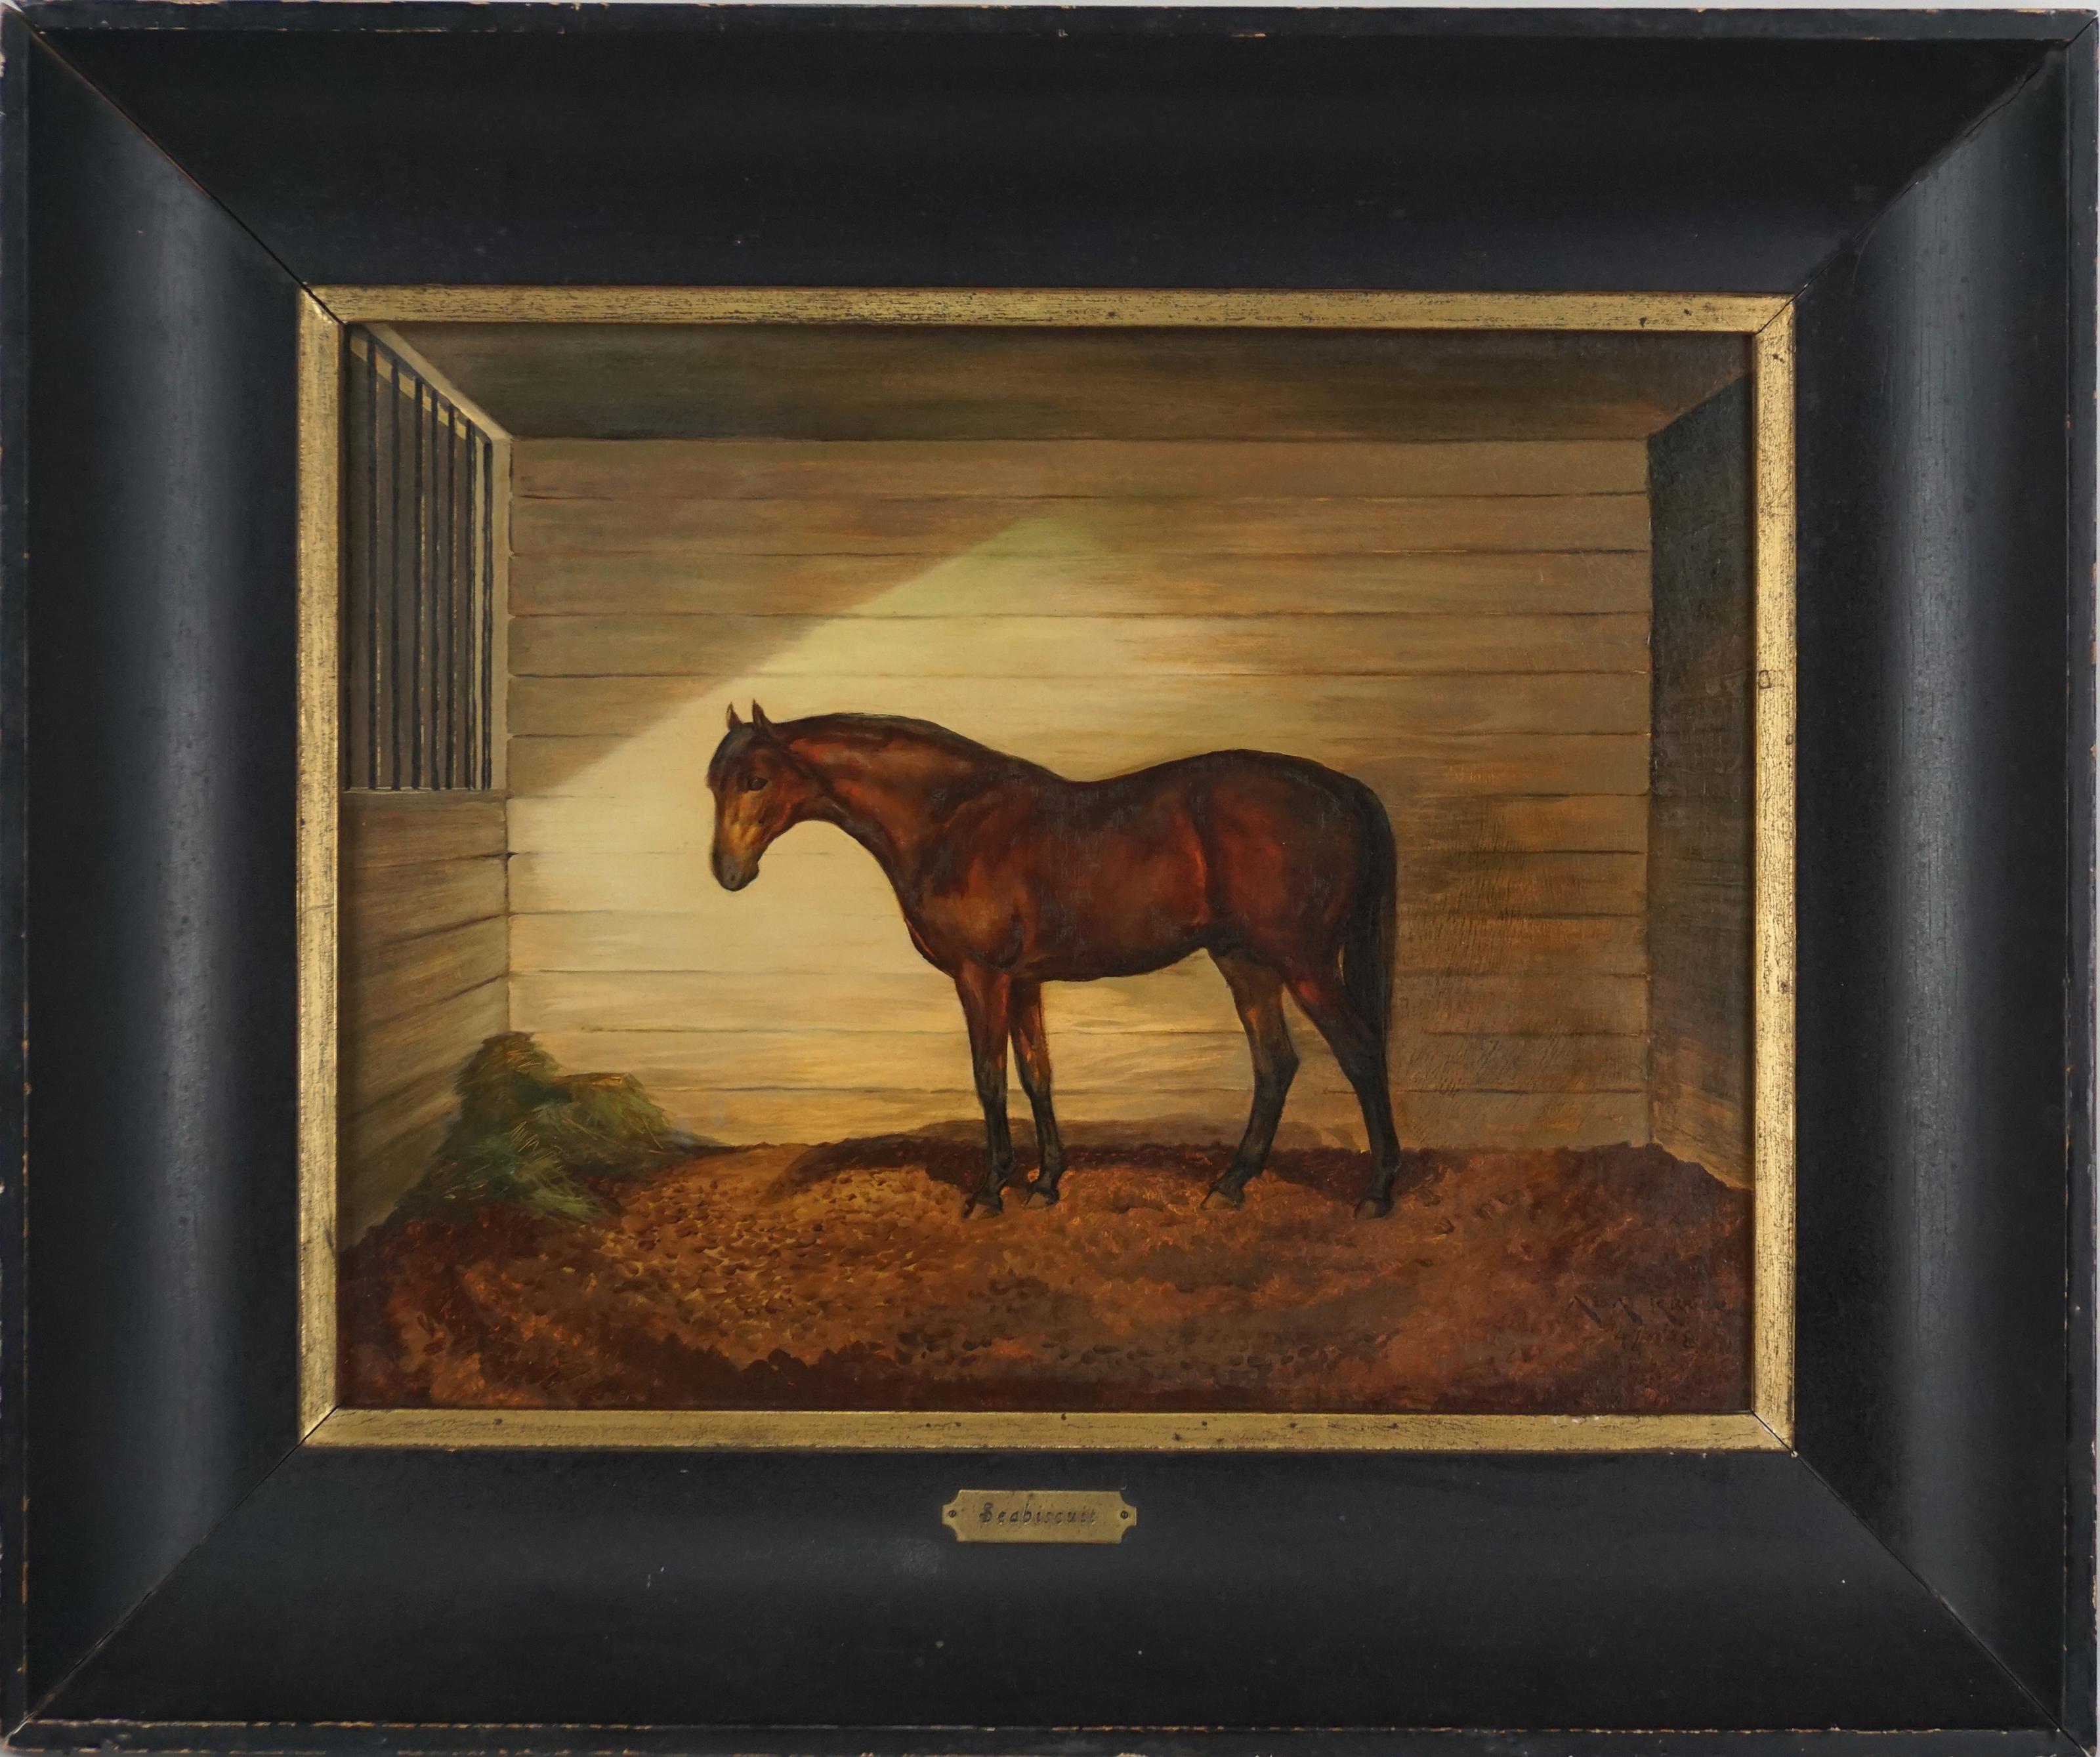 Gorgeous horse portrait of "Seabiscuit" by Ada Kruse a Santa Cruz artist (American, 1900-1995), 1947-1948. Signed and dated lower right corner "Ada Kruse "1947 1948" with brass plaque. "Seabiscuit" heritage/breeding is written out on verso.